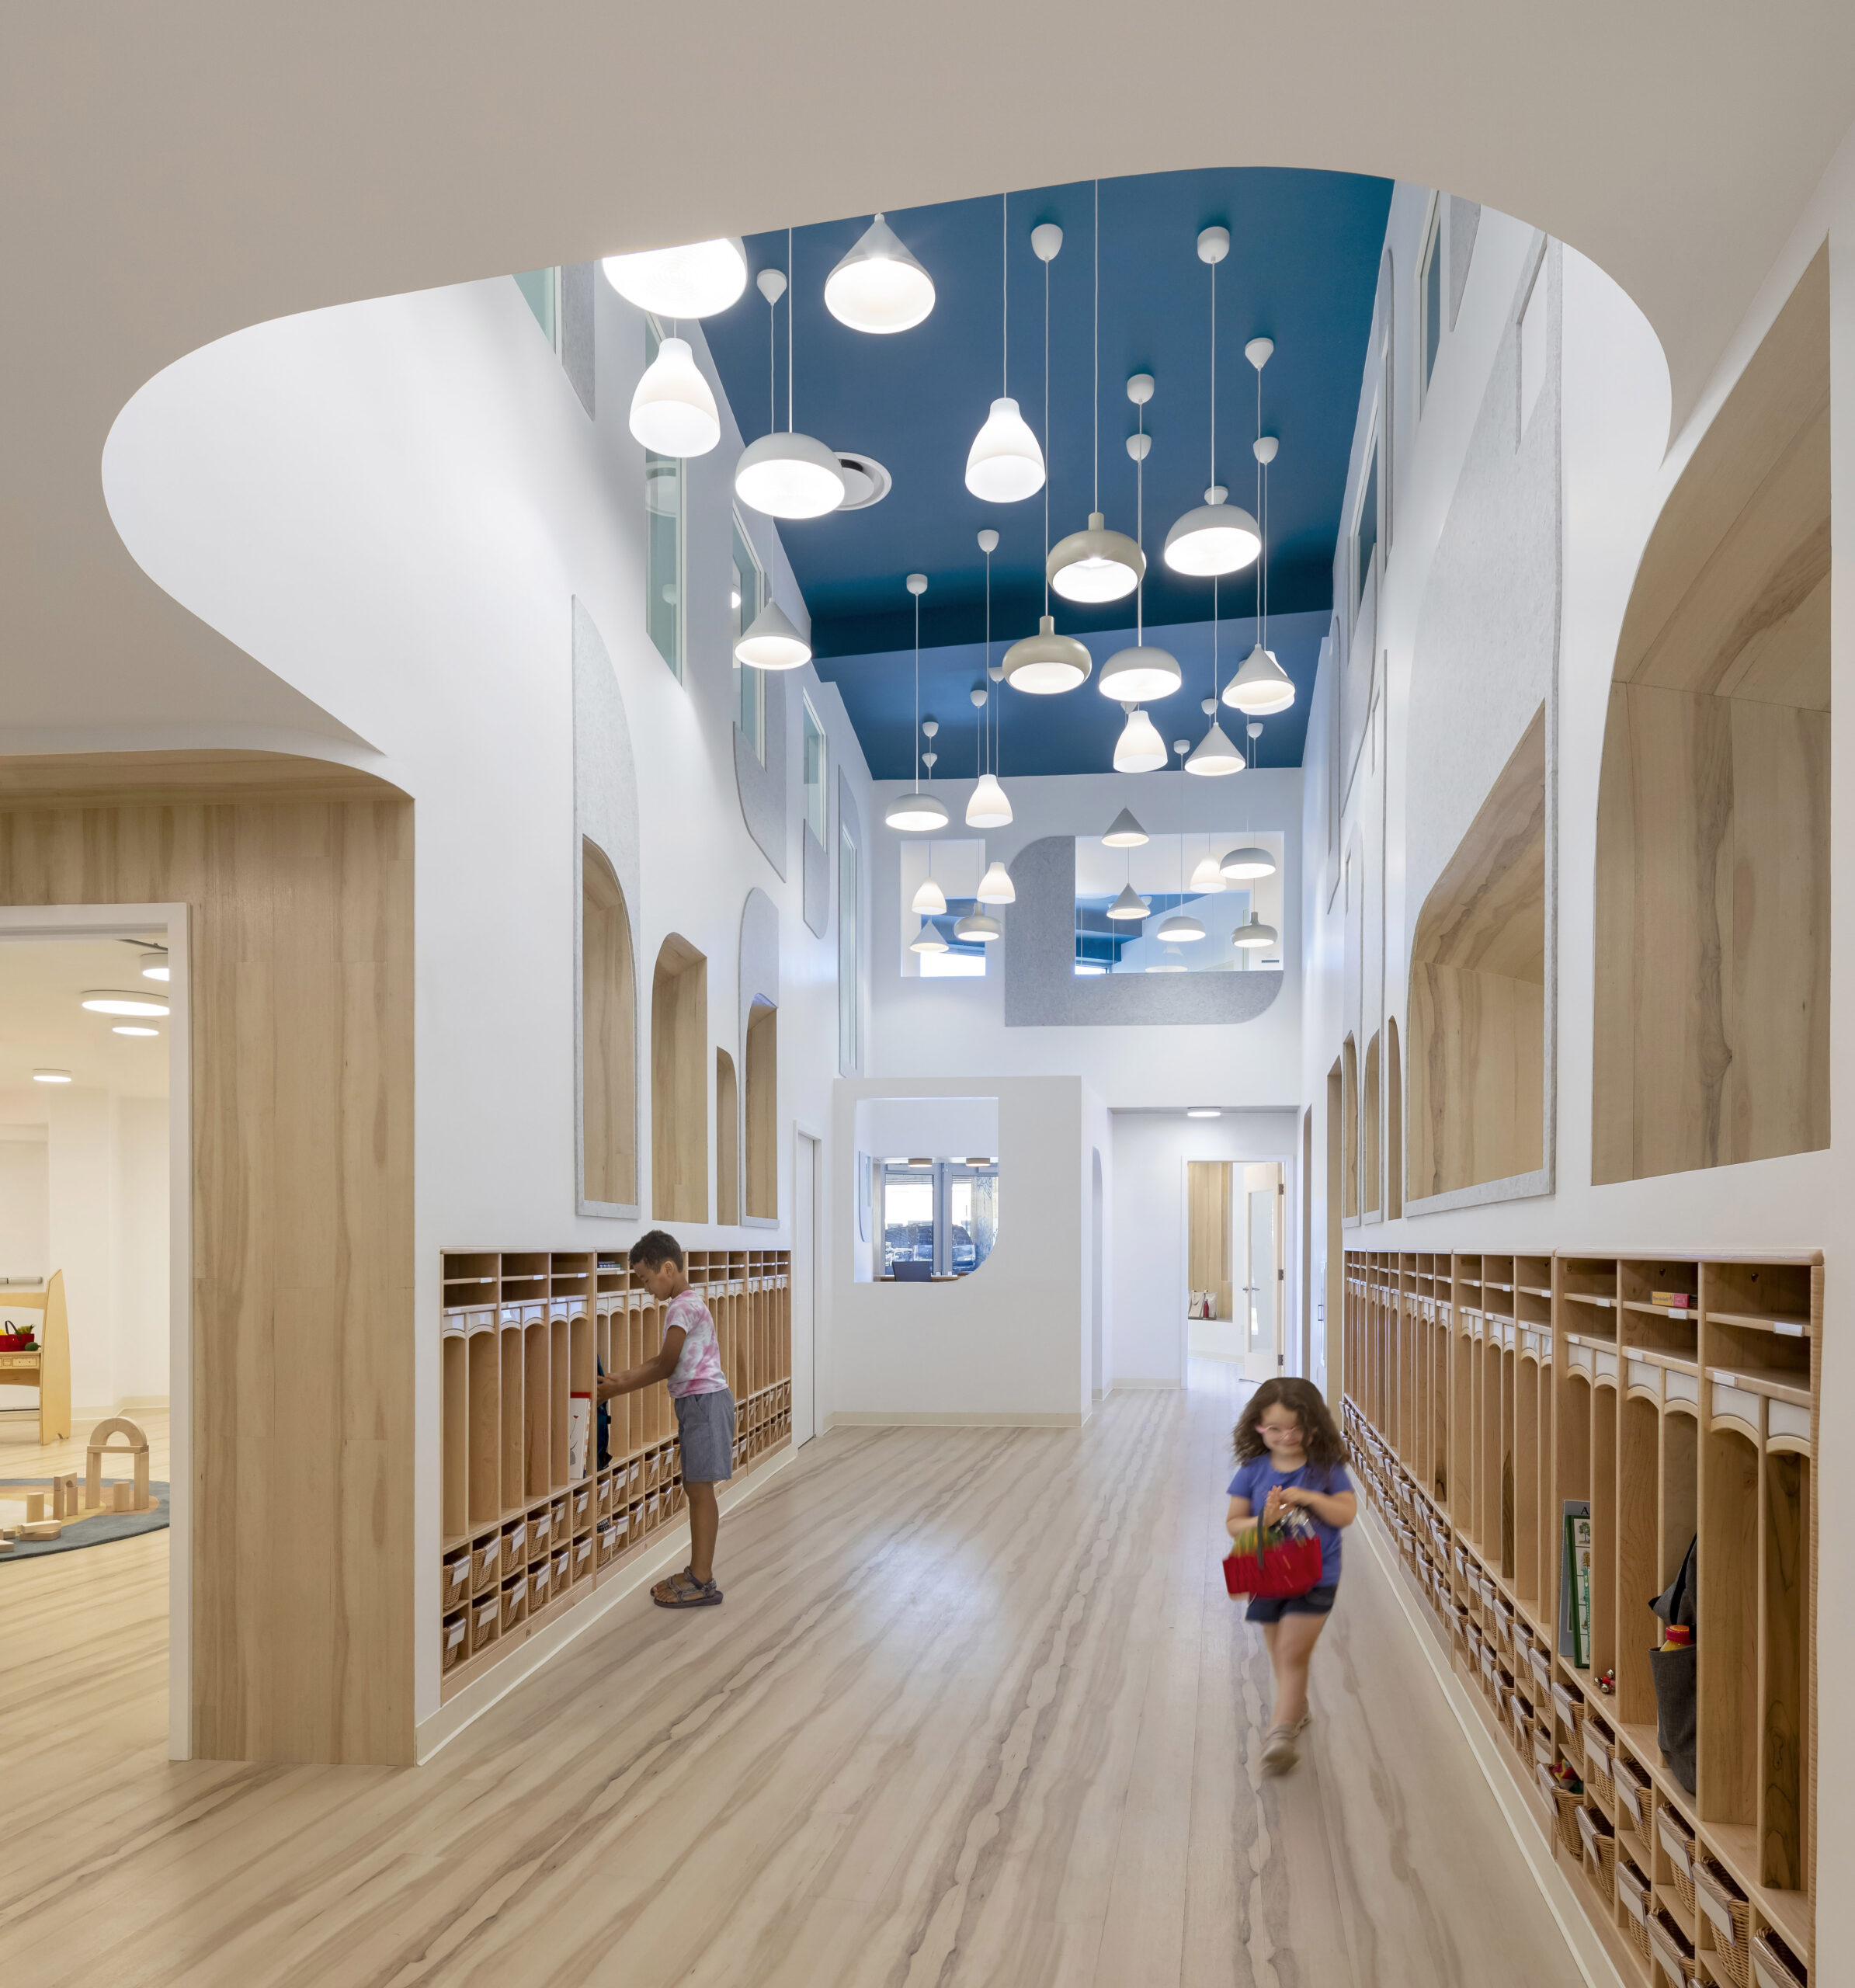 Children utilizing the convenient wooden built-in lockers in the two-story locker space, accentuated by a vibrant blue ceiling and unique lighting fixtures that create a playful and functional space.